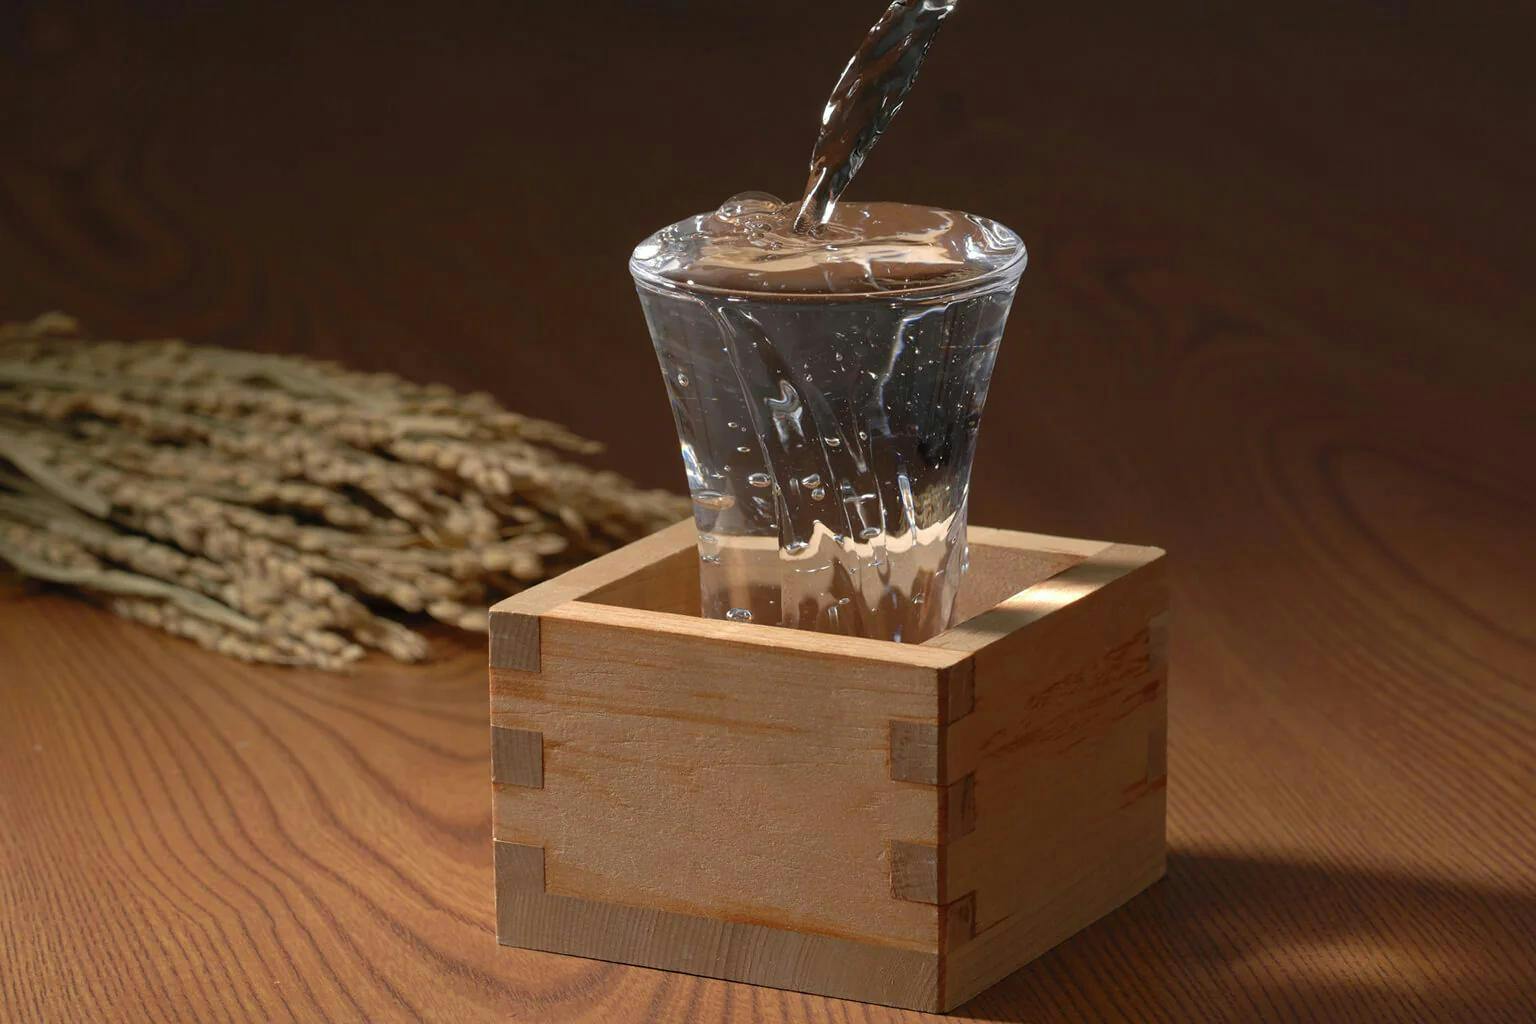 Sake is poured “mokkiri” style, overflowing into the wooden “masu” as a demonstration of generosity and hospitality.